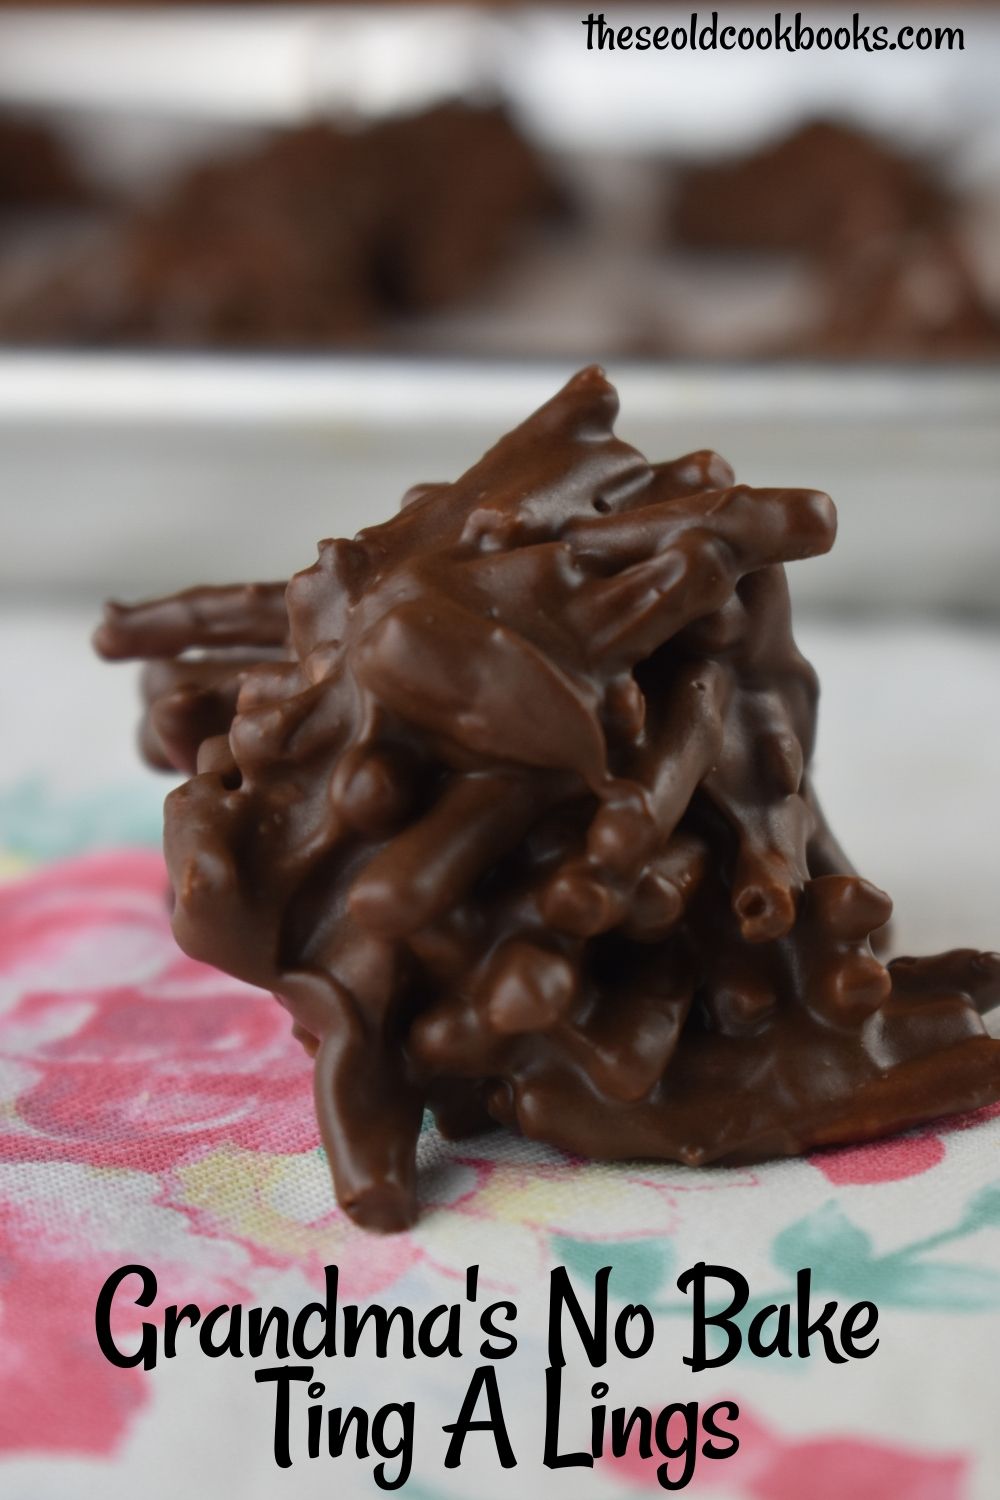 Ting A Lings – Christmas Candy with Chow Mein Noodles